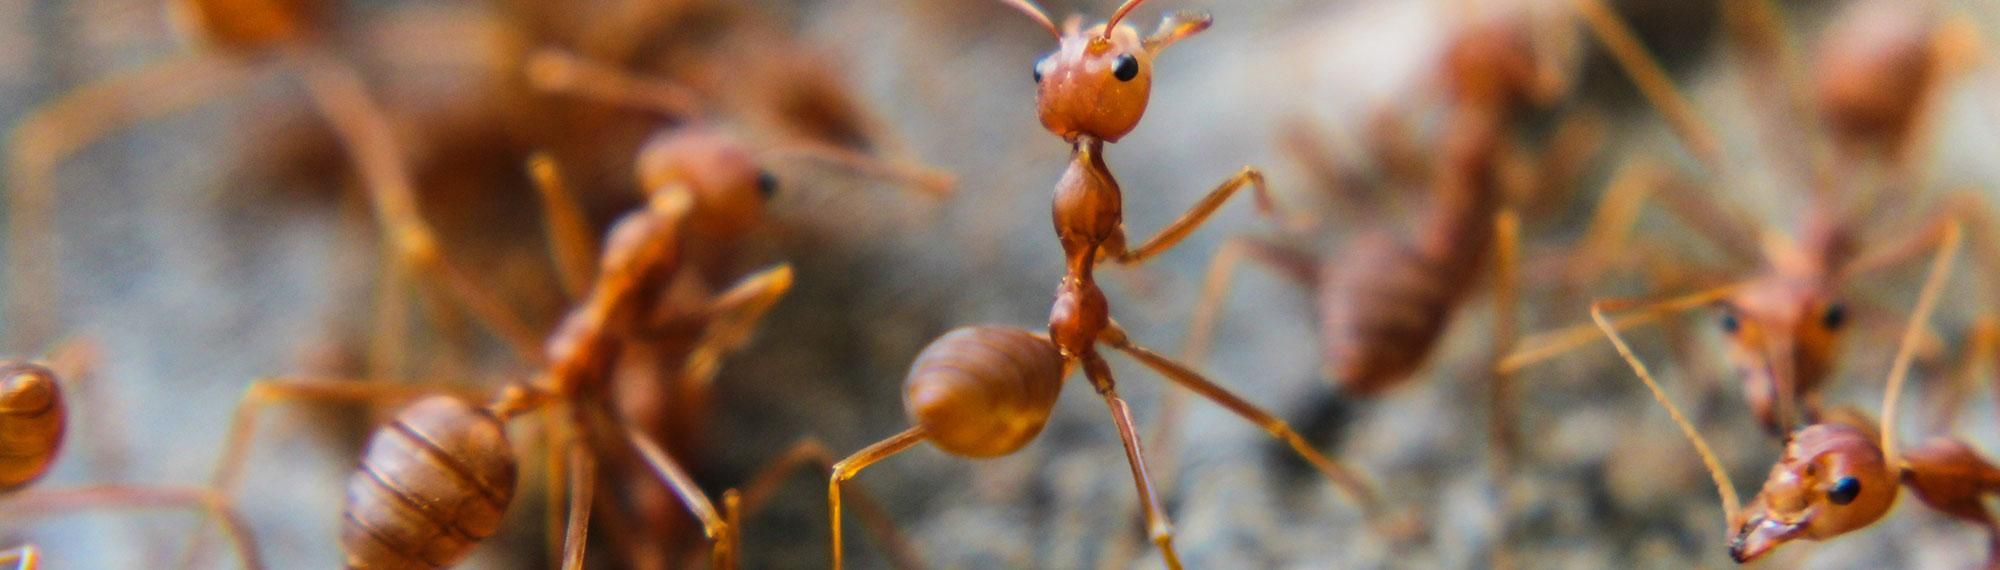 red imported fire ants in virginia